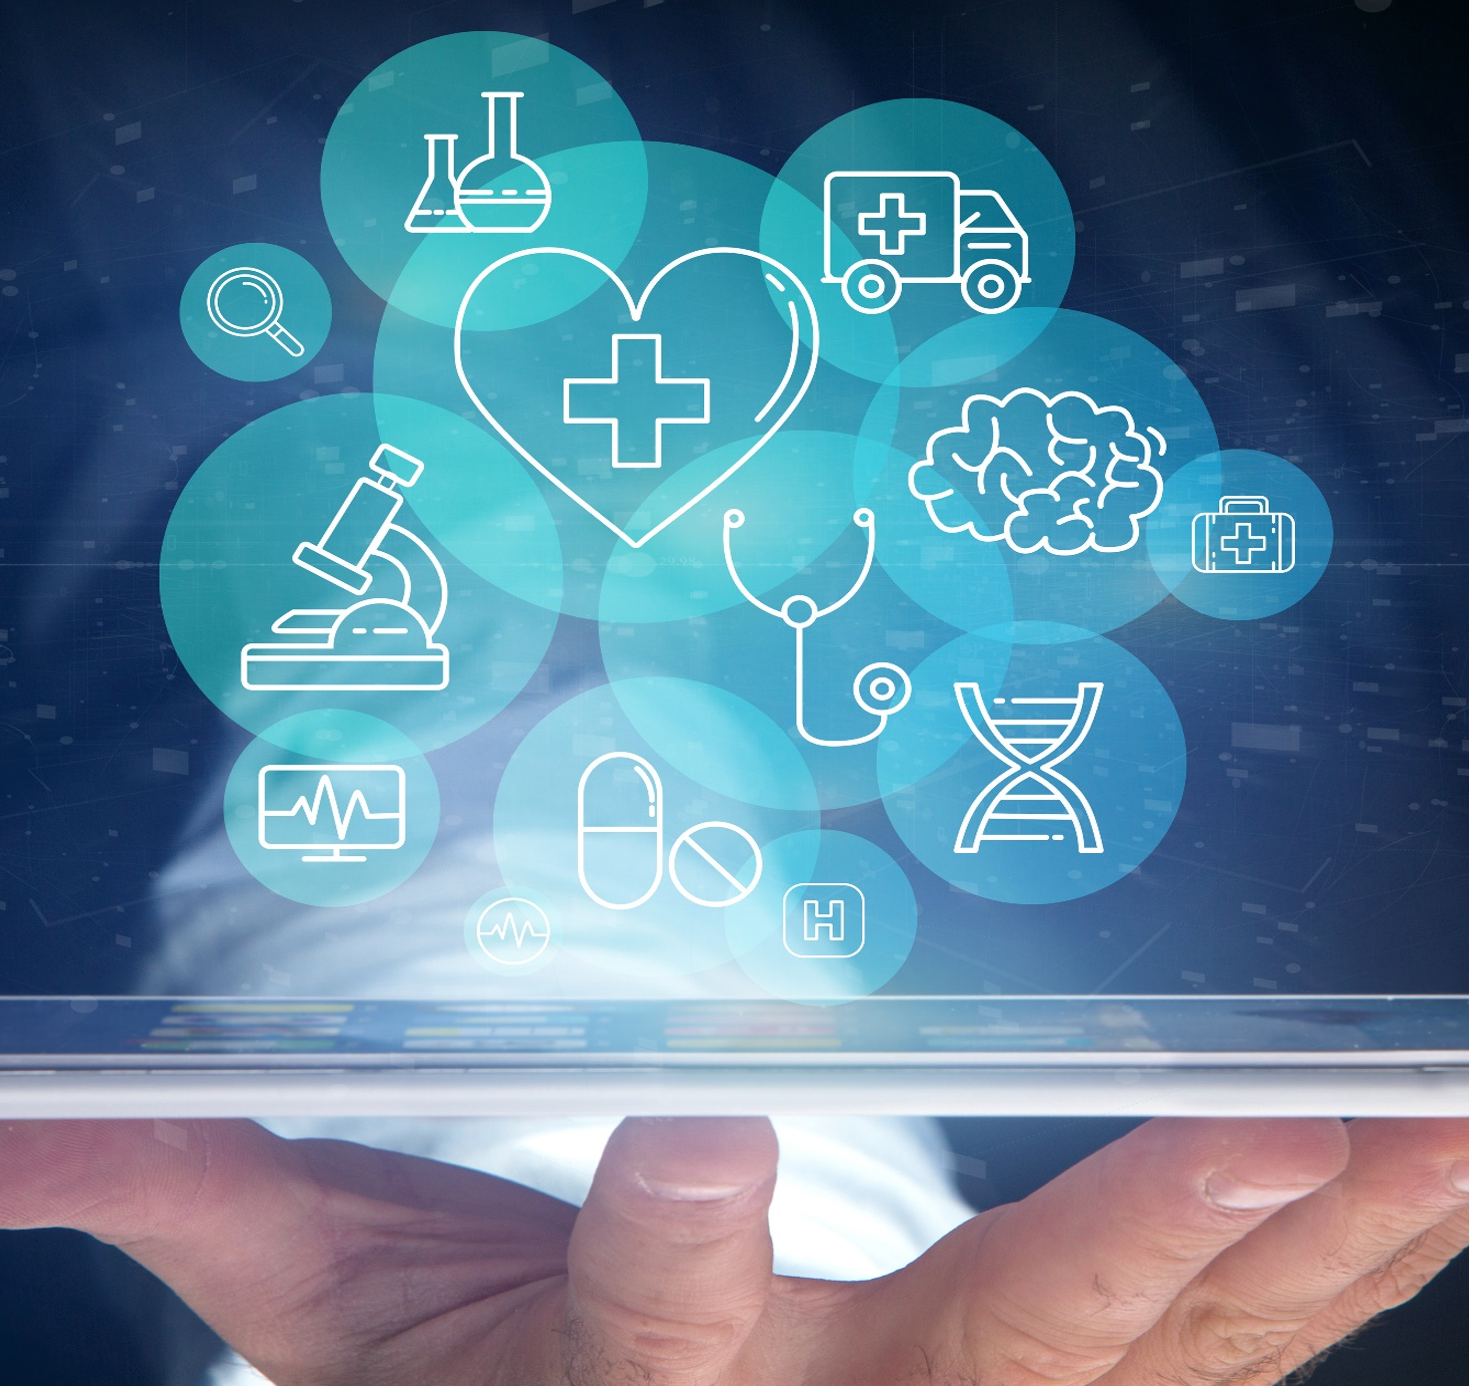 5 Problems in Healthcare: Is Digital Health the answer?